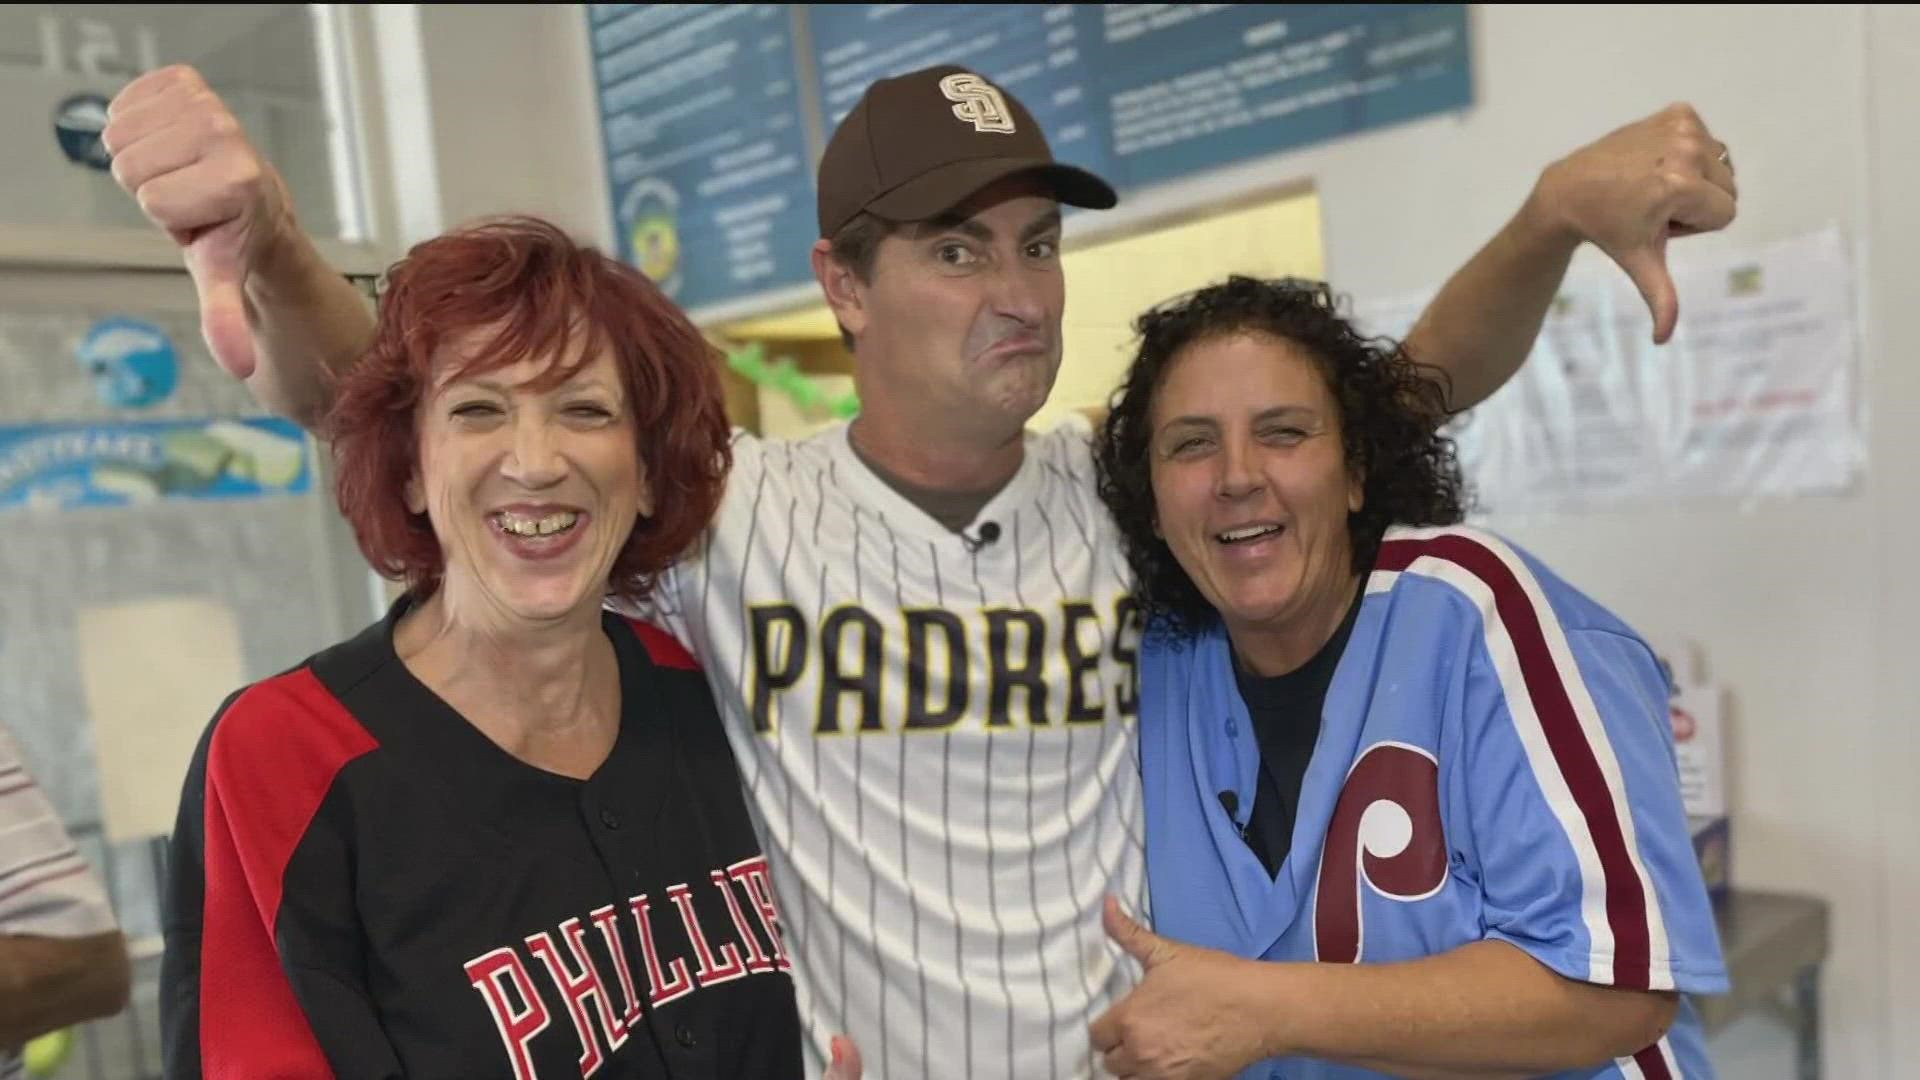 Padres fans beware: Delicious cheesesteak shop in San Marcos is Philadelphia strong.